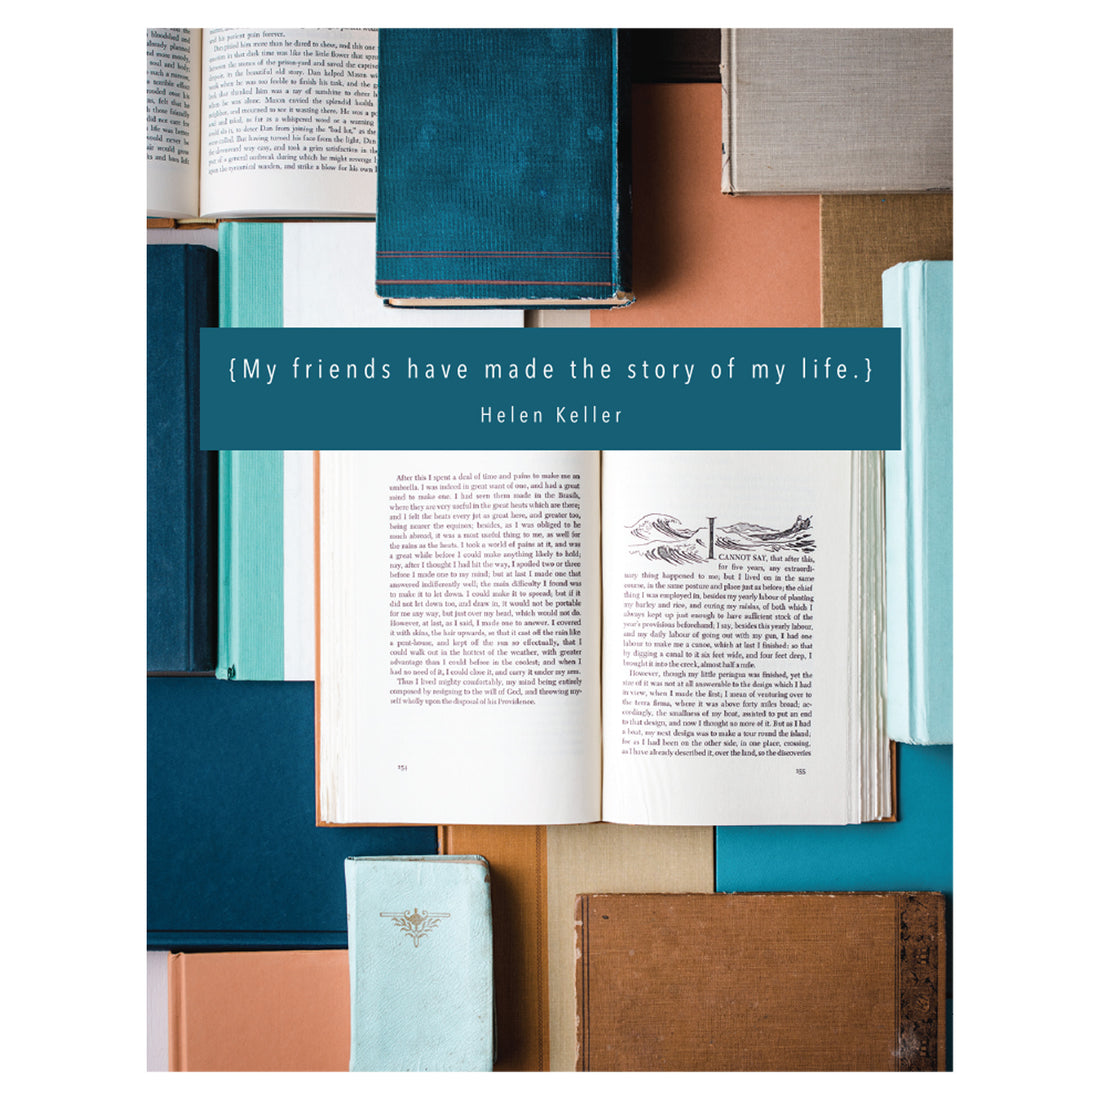 A top-down photo of various antique books with blue, brown and tan covers, mostly closed and layered together and two open to show the text, with &quot;{My friends have made the story of my life.} Helen Keller&quot; printed over the image.